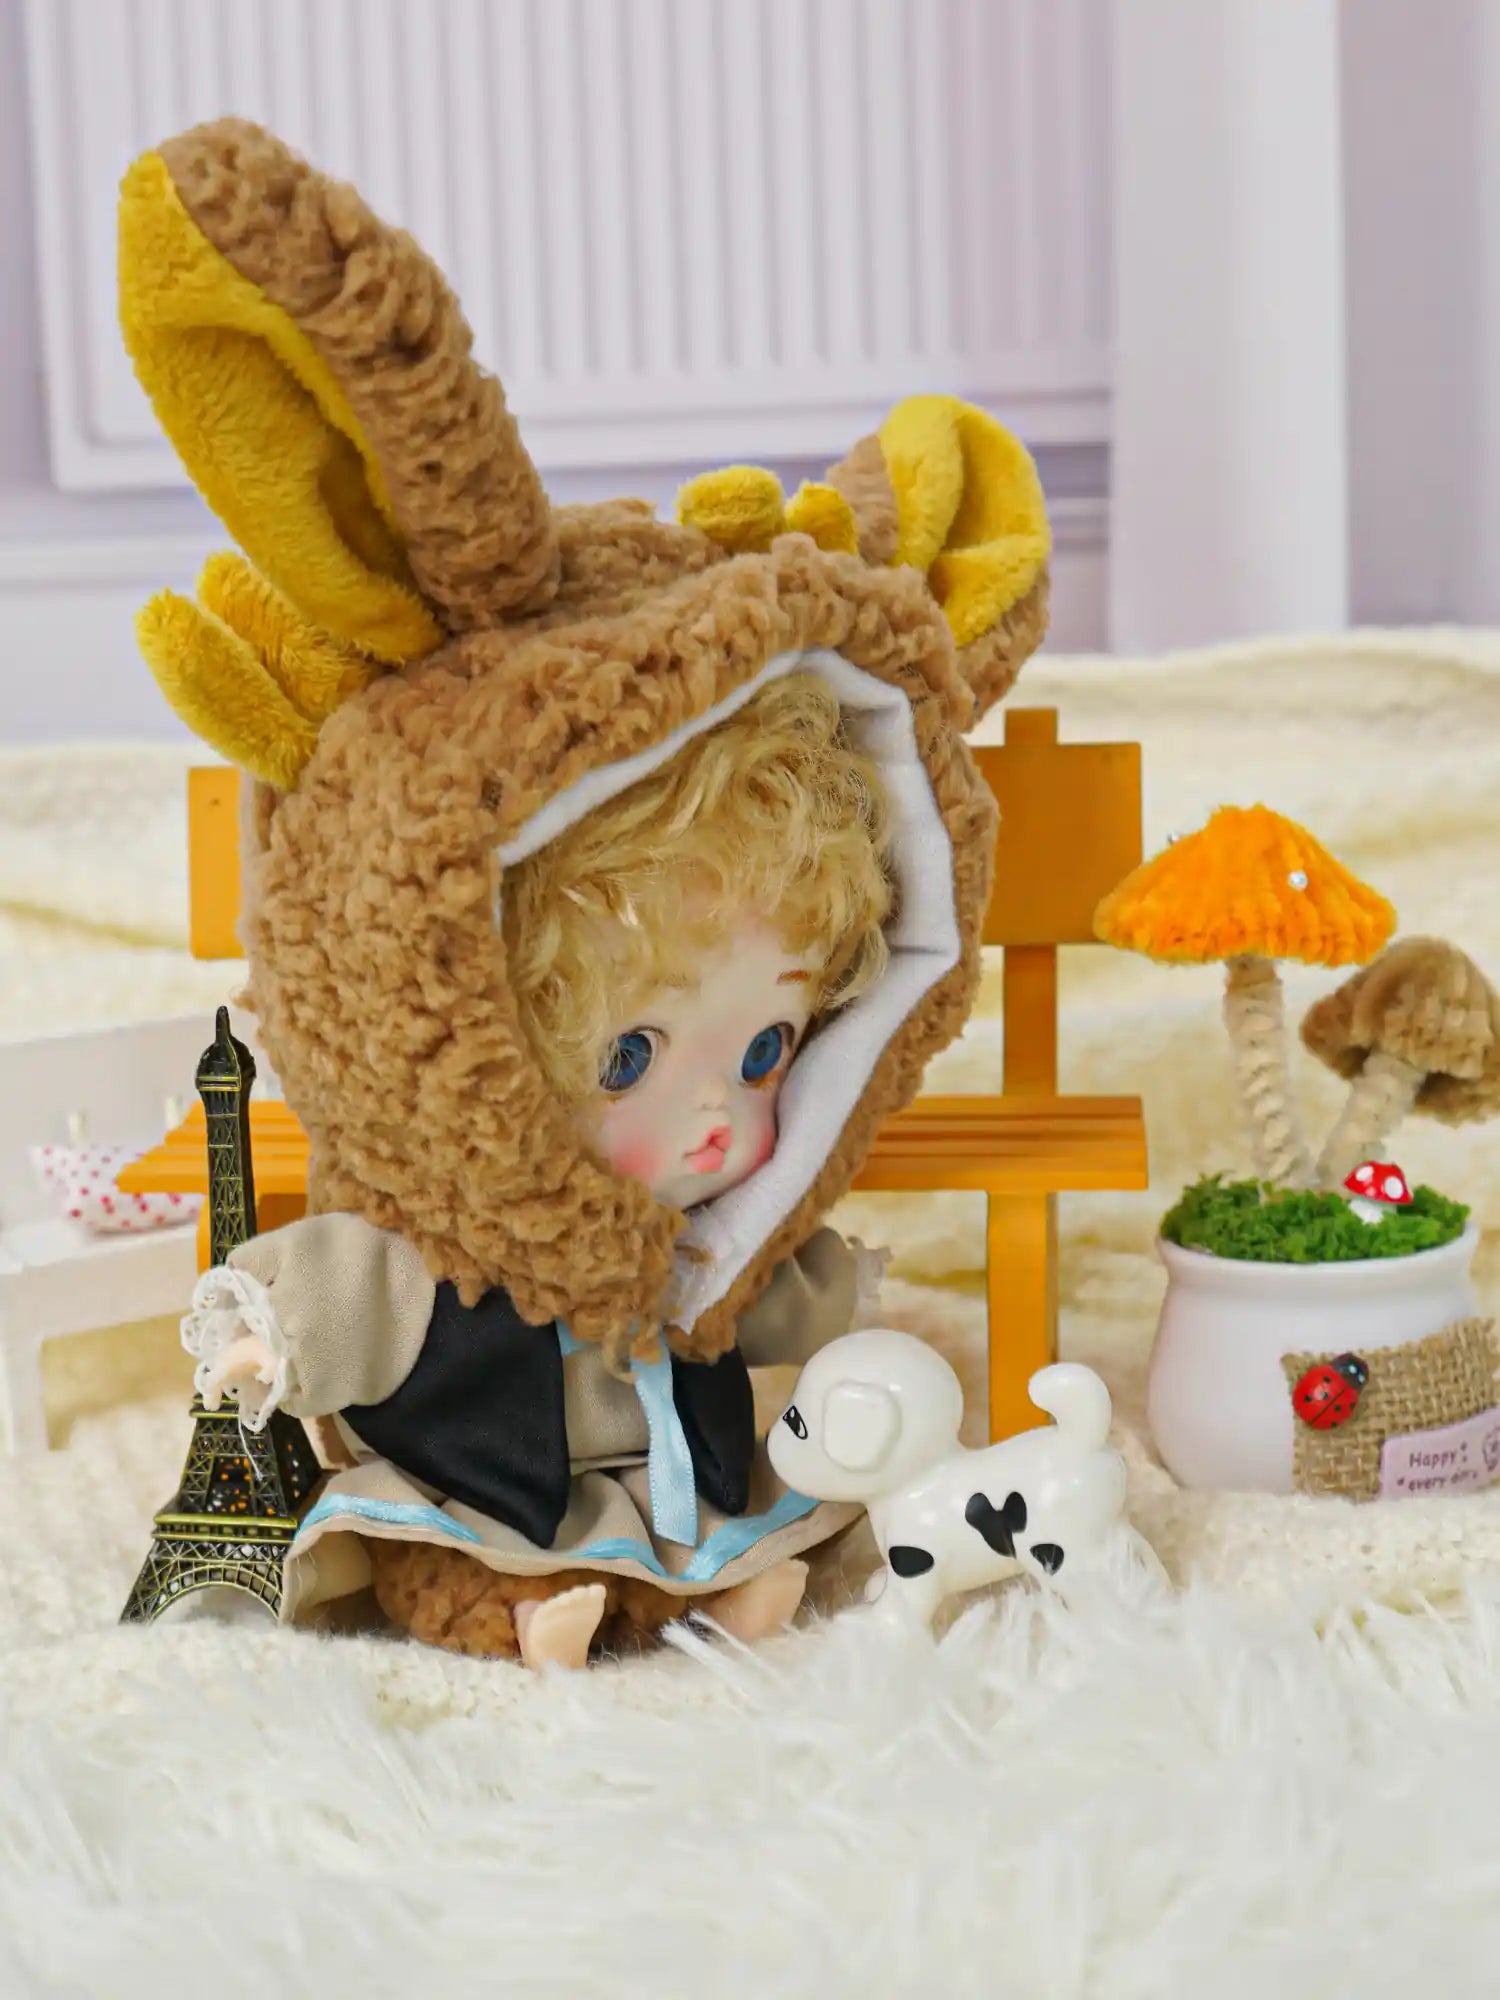 A doll with a plush rabbit headwear, nestled on a soft rug with a mini Eiffel Tower and a white dog companion.